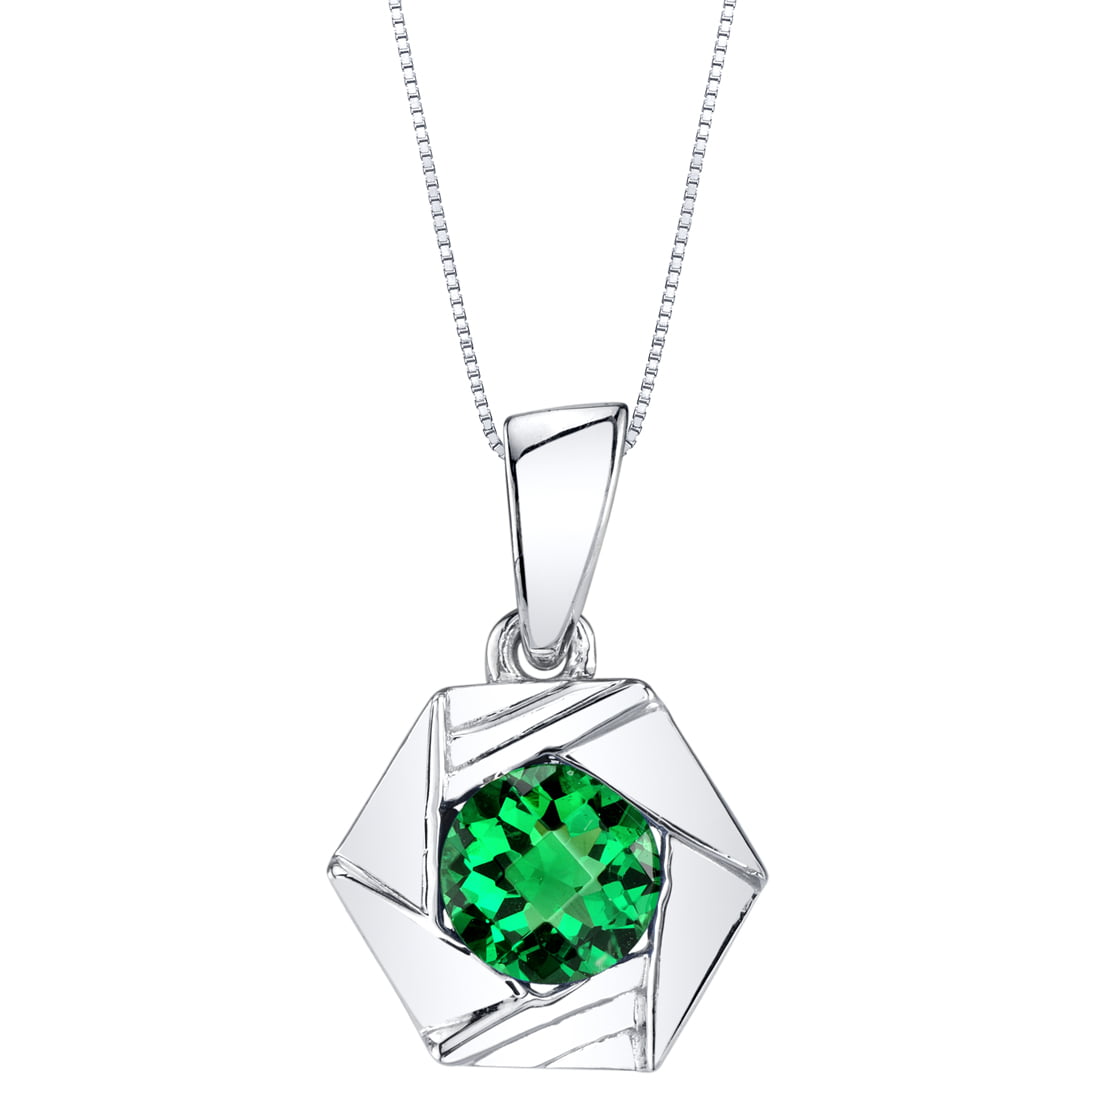 Details about   Simulated Emerald Sterling Silver Trinity Knot Pendant Necklace 0.75 Carats 